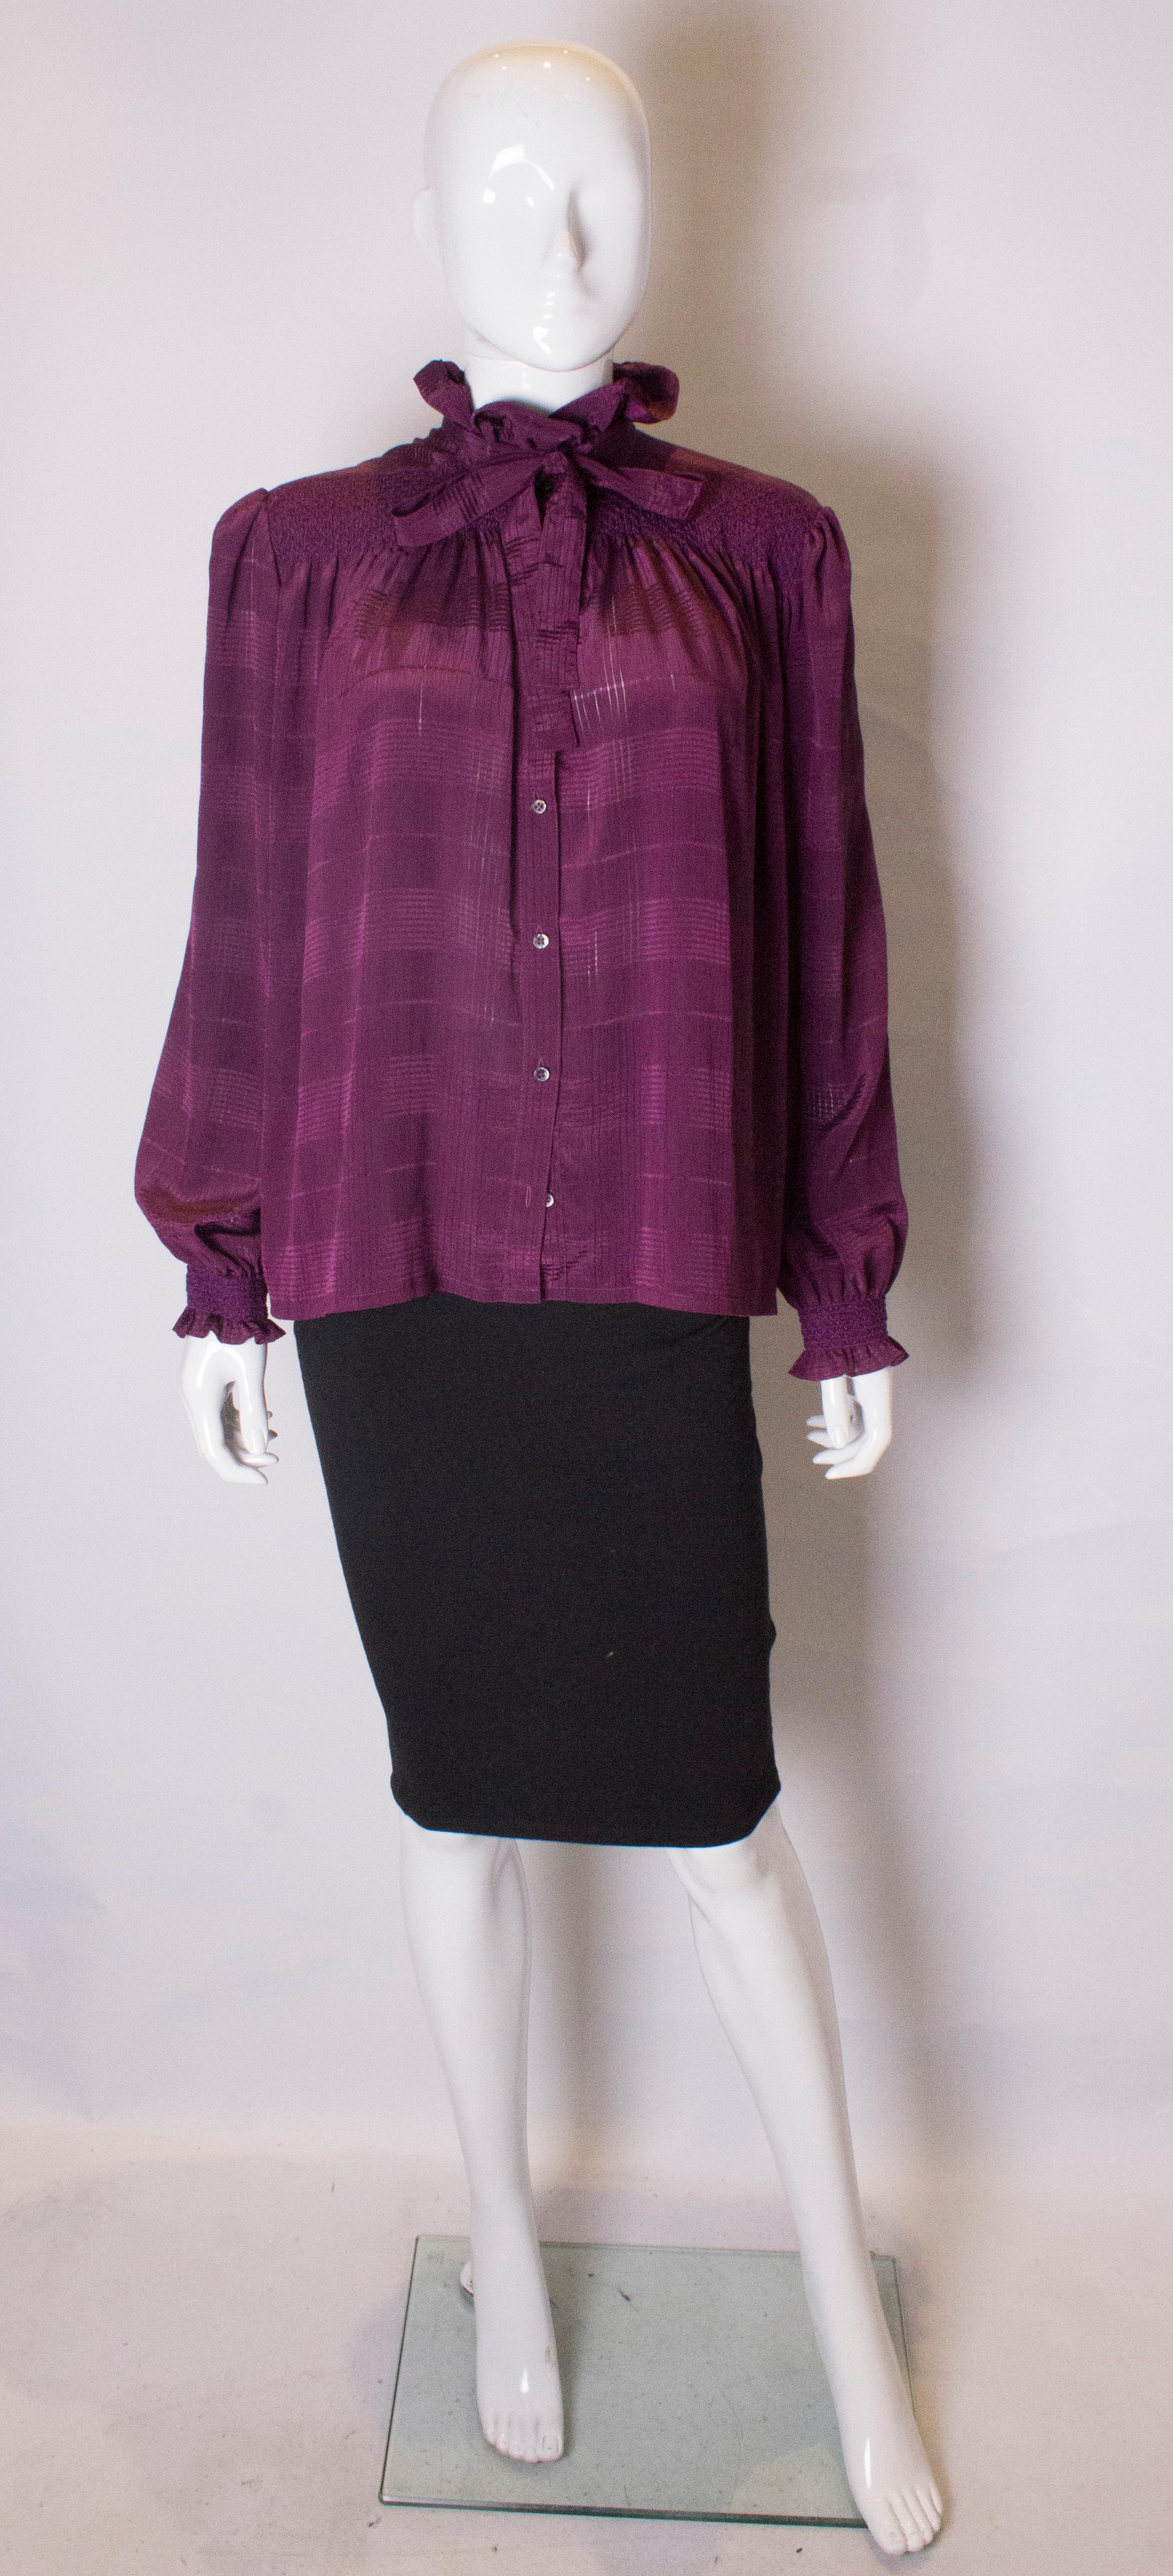 A chic and easy to wear vintage blouse by Jeager. The blouse has interesting smocking detail on the front and cuffs, and has a button through front and self fabric neck tie.